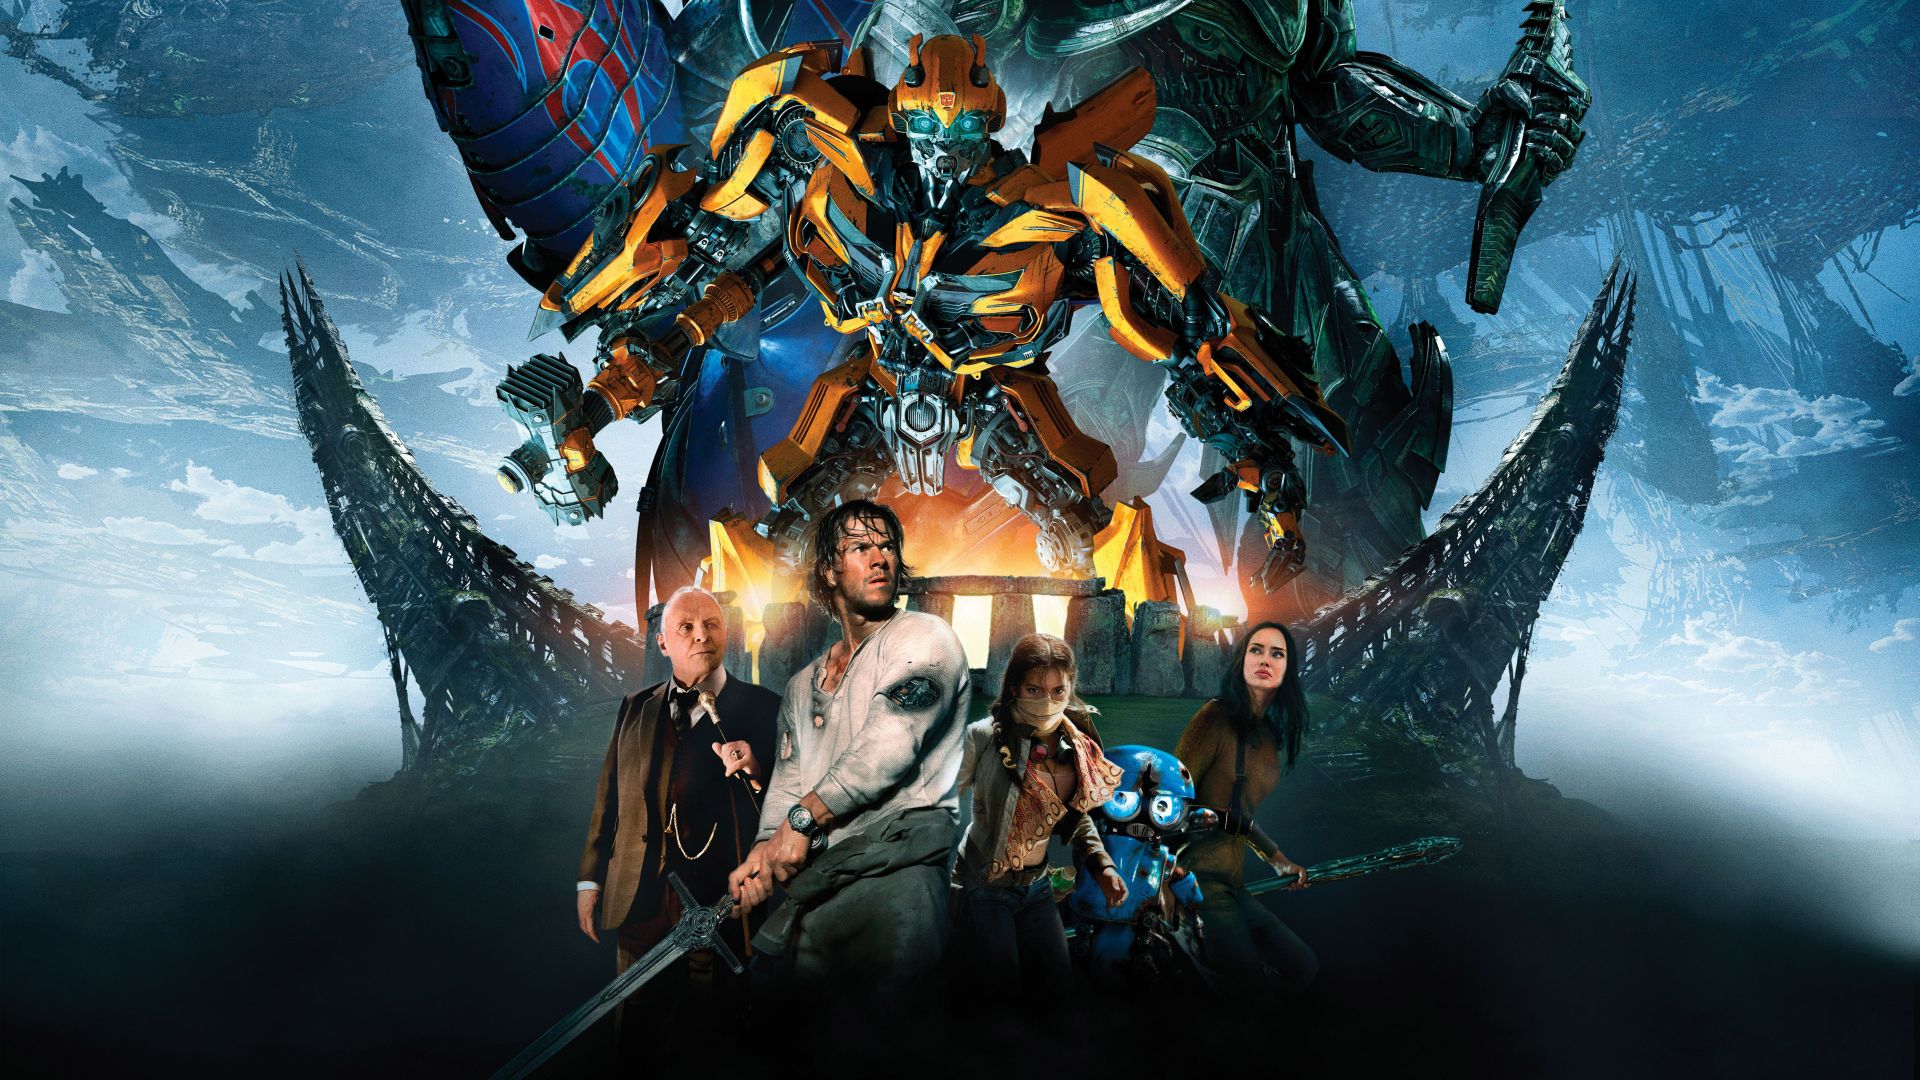 Wallpaper Transformers: The last knight, 2017 movie, cast, poster